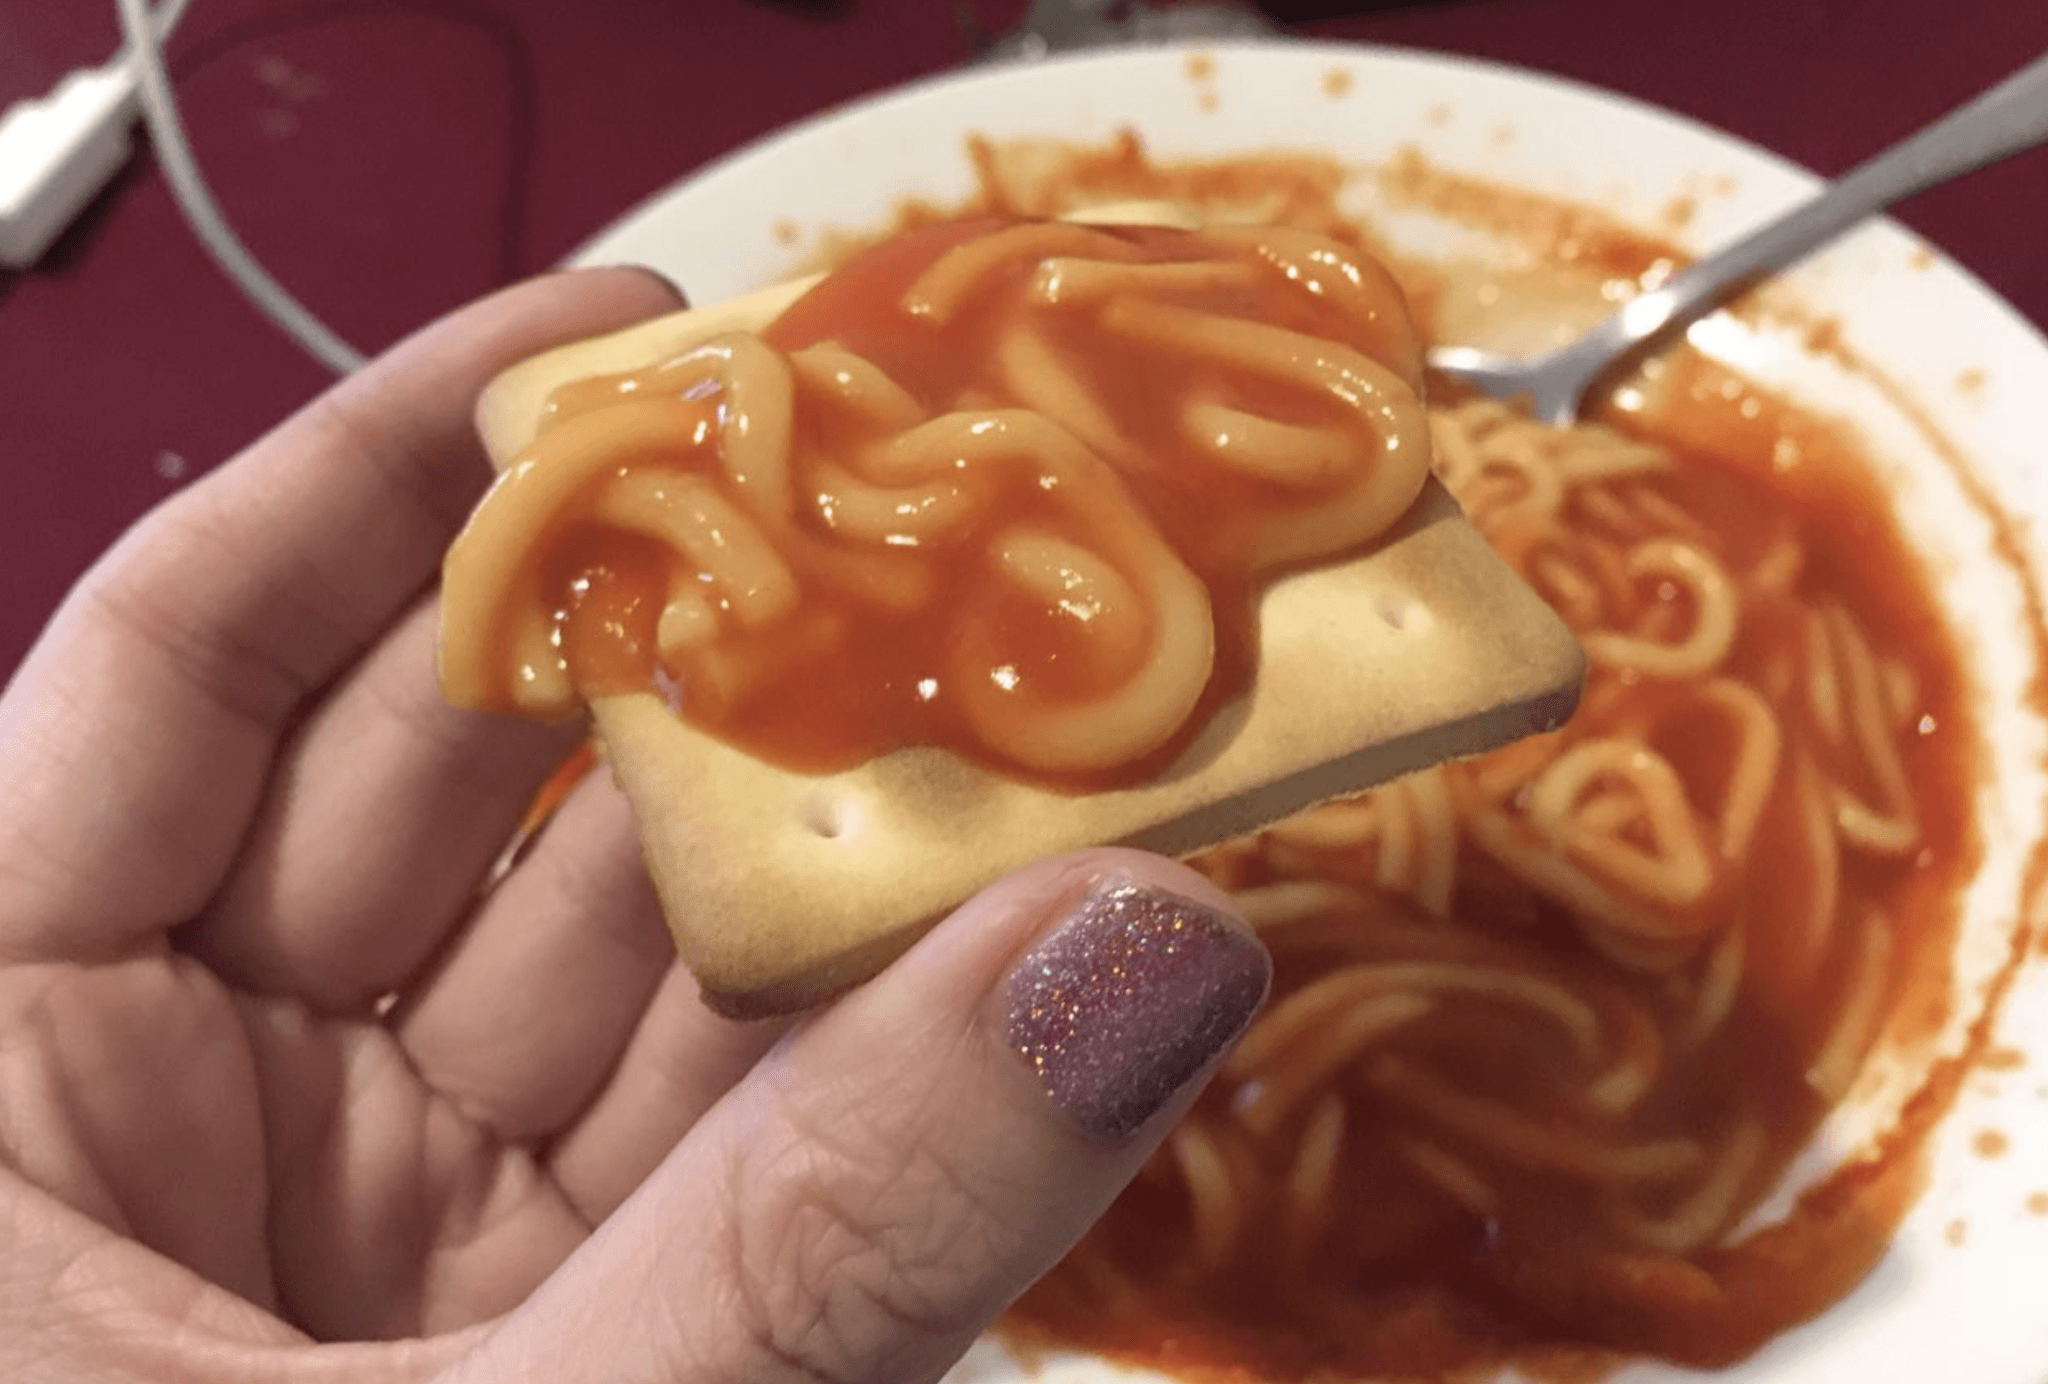 Crackers and spaghetti